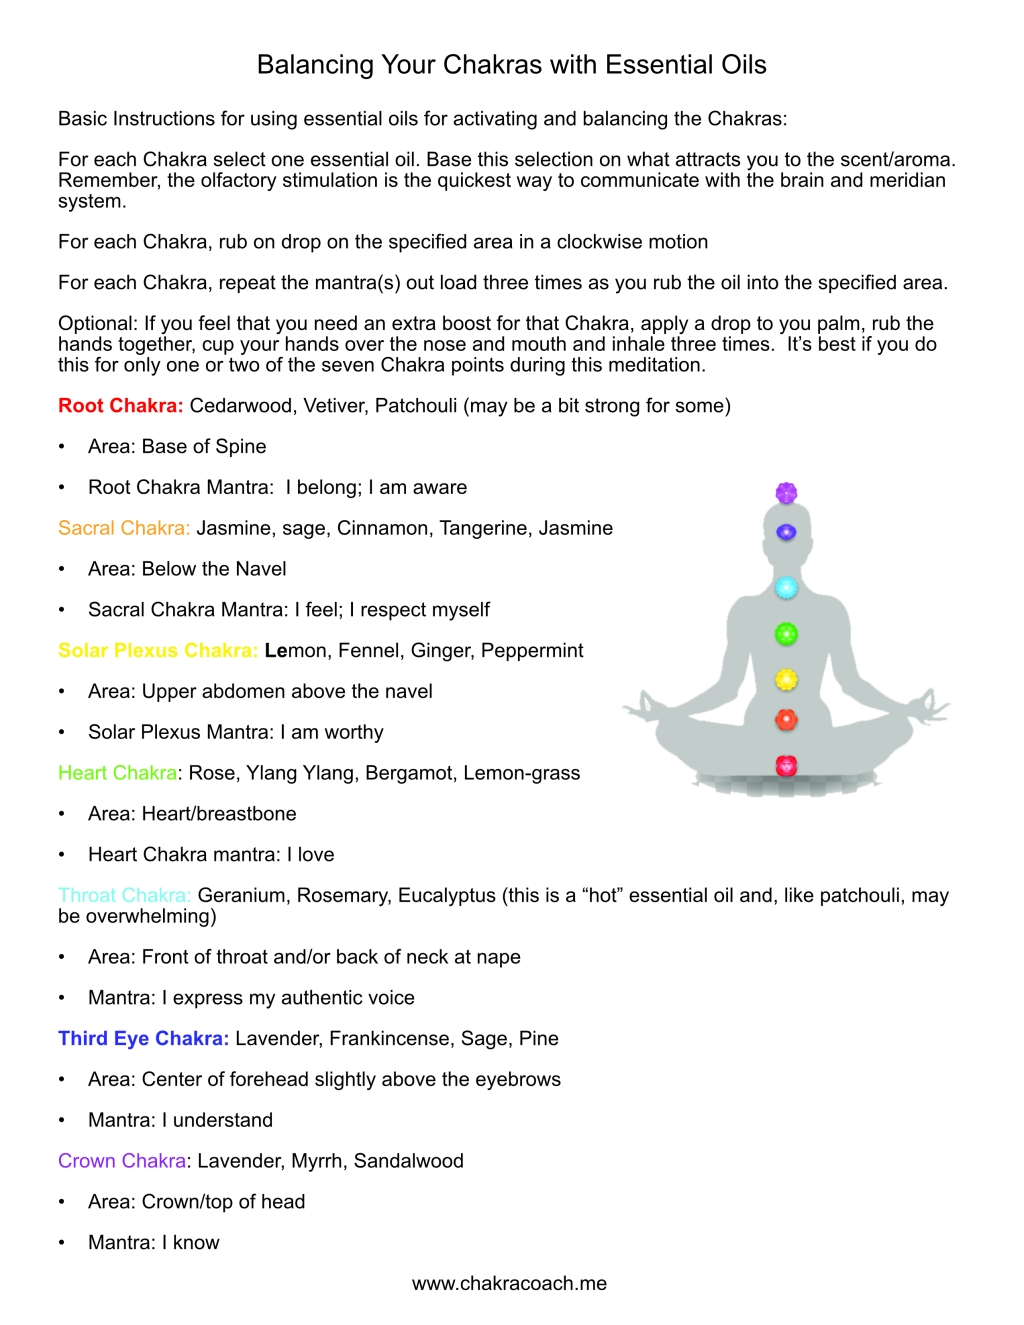 Quick Guide – Balancing Your Chakras with Essential Oils